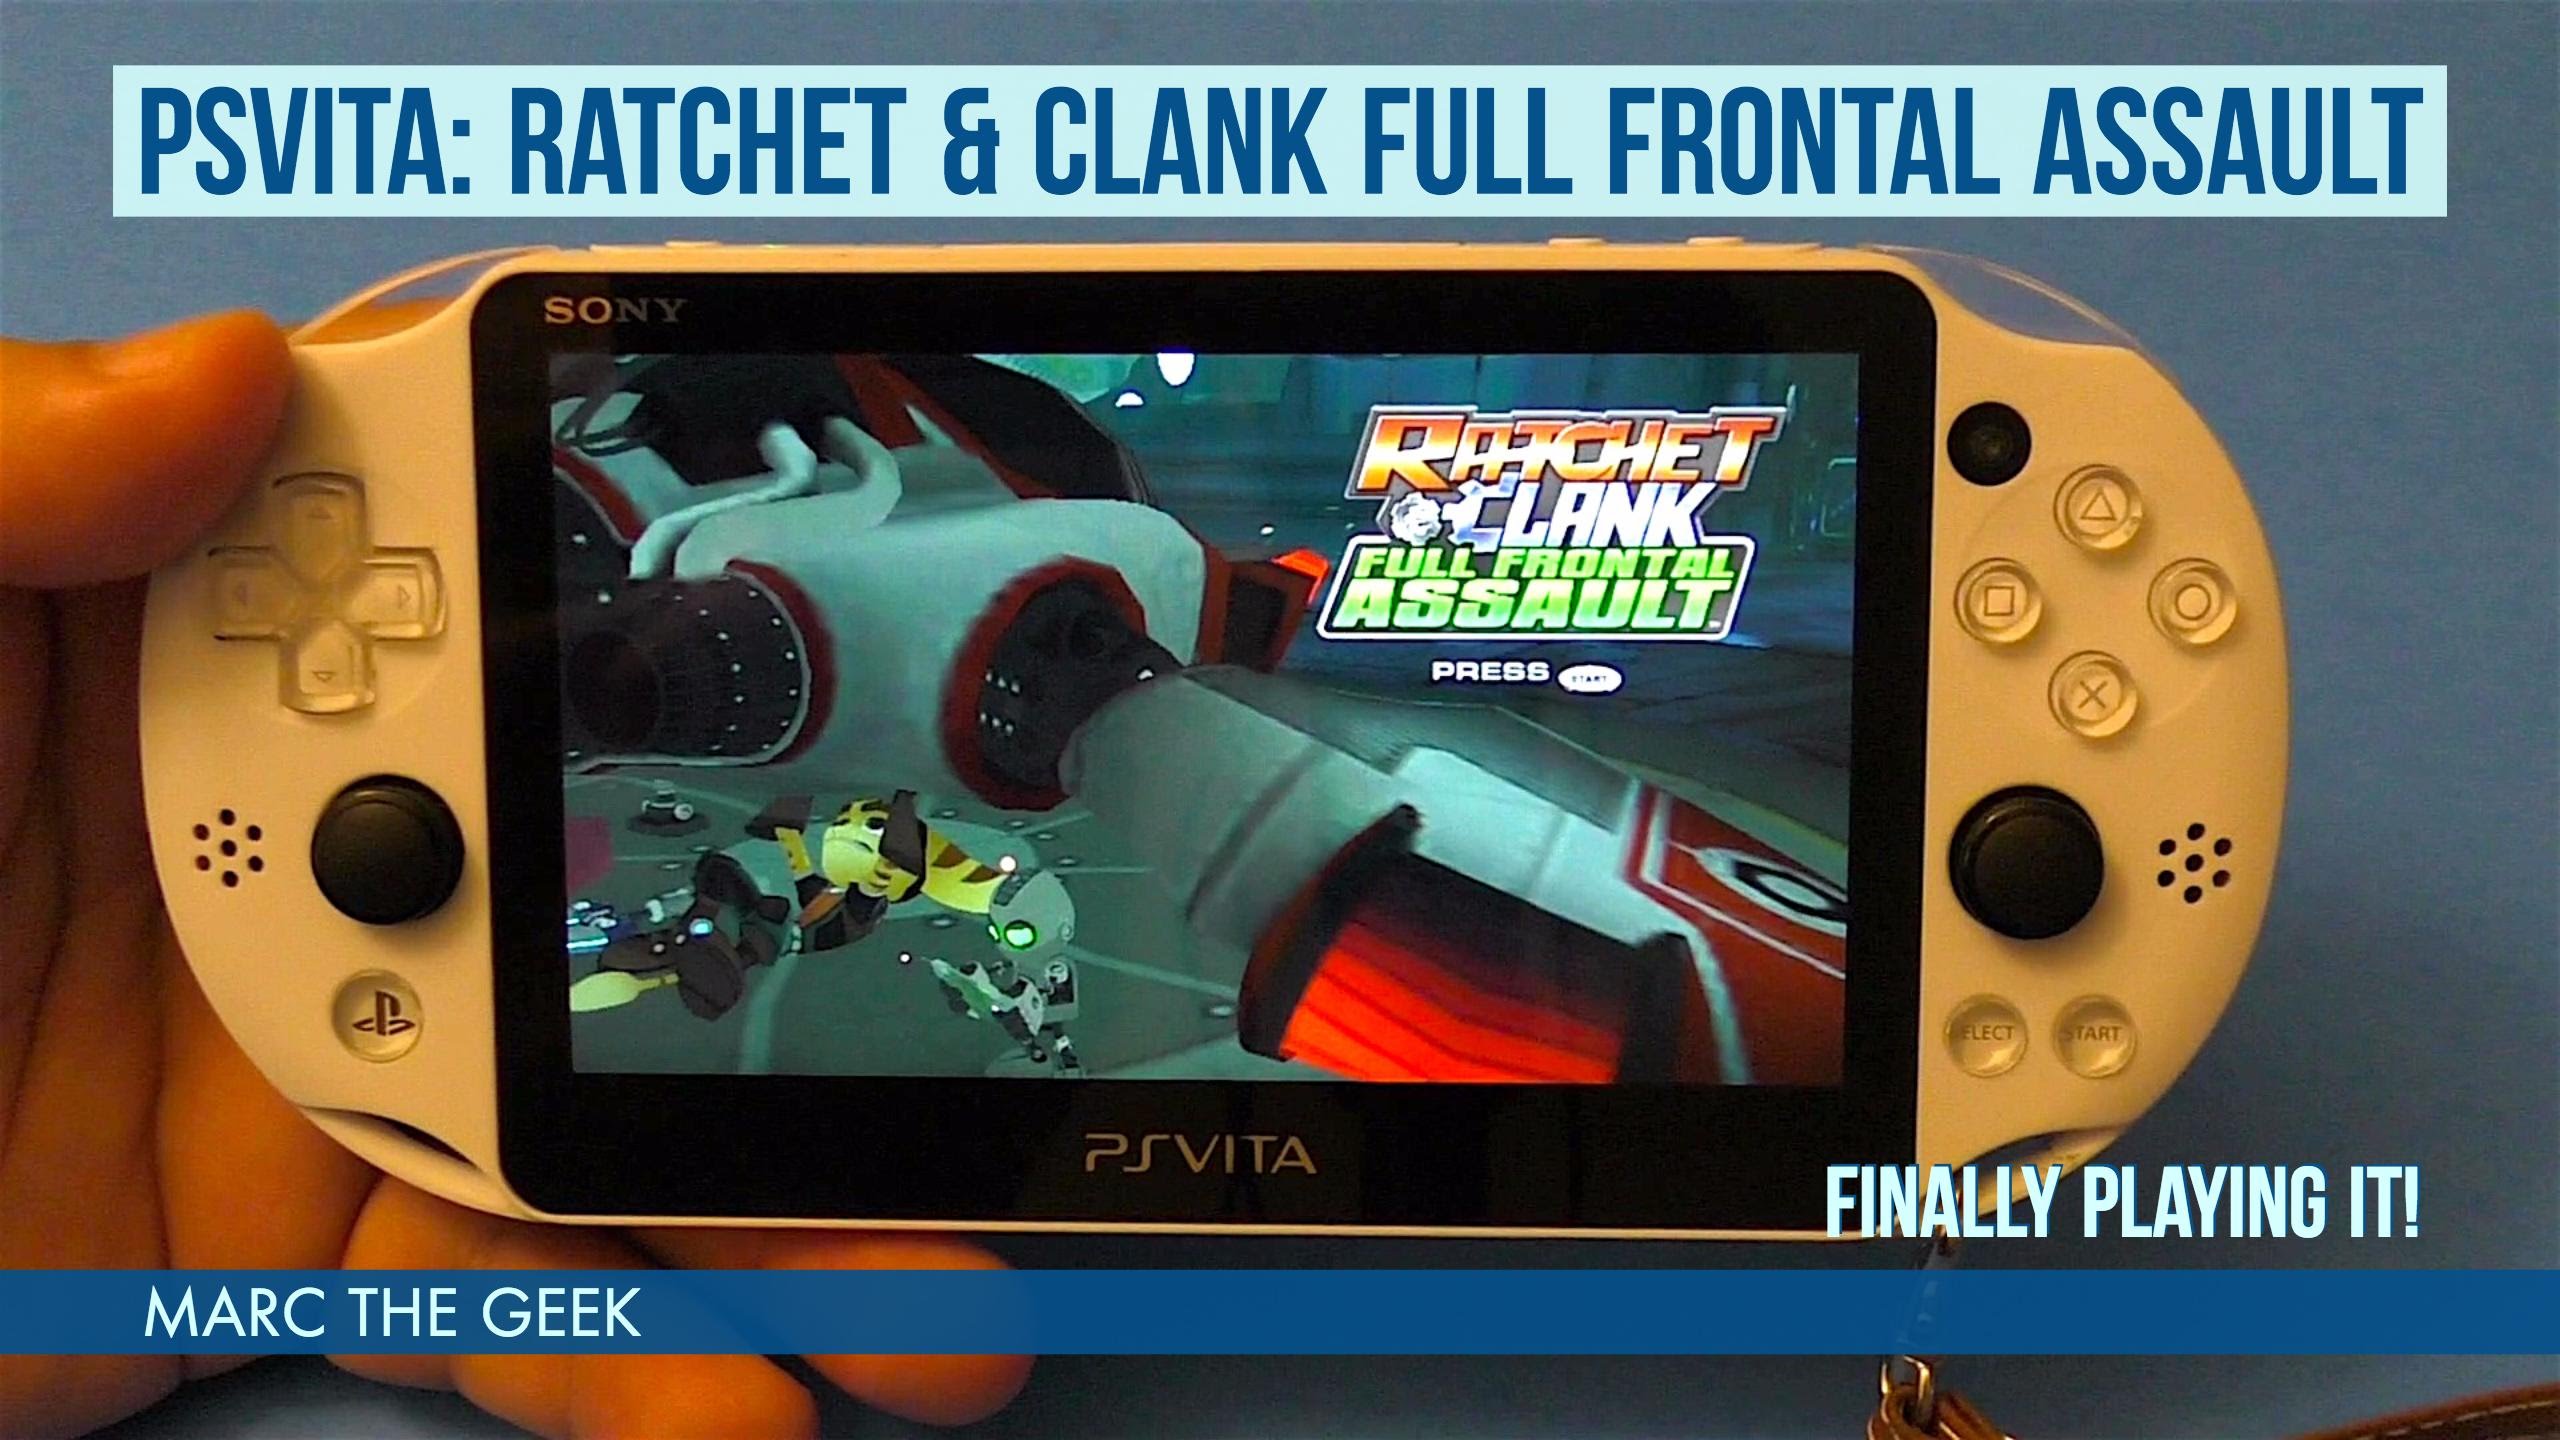 Ratchet & Clank: Full Frontal Assault Backgrounds, Compatible - PC, Mobile, Gadgets| 2560x1440 px